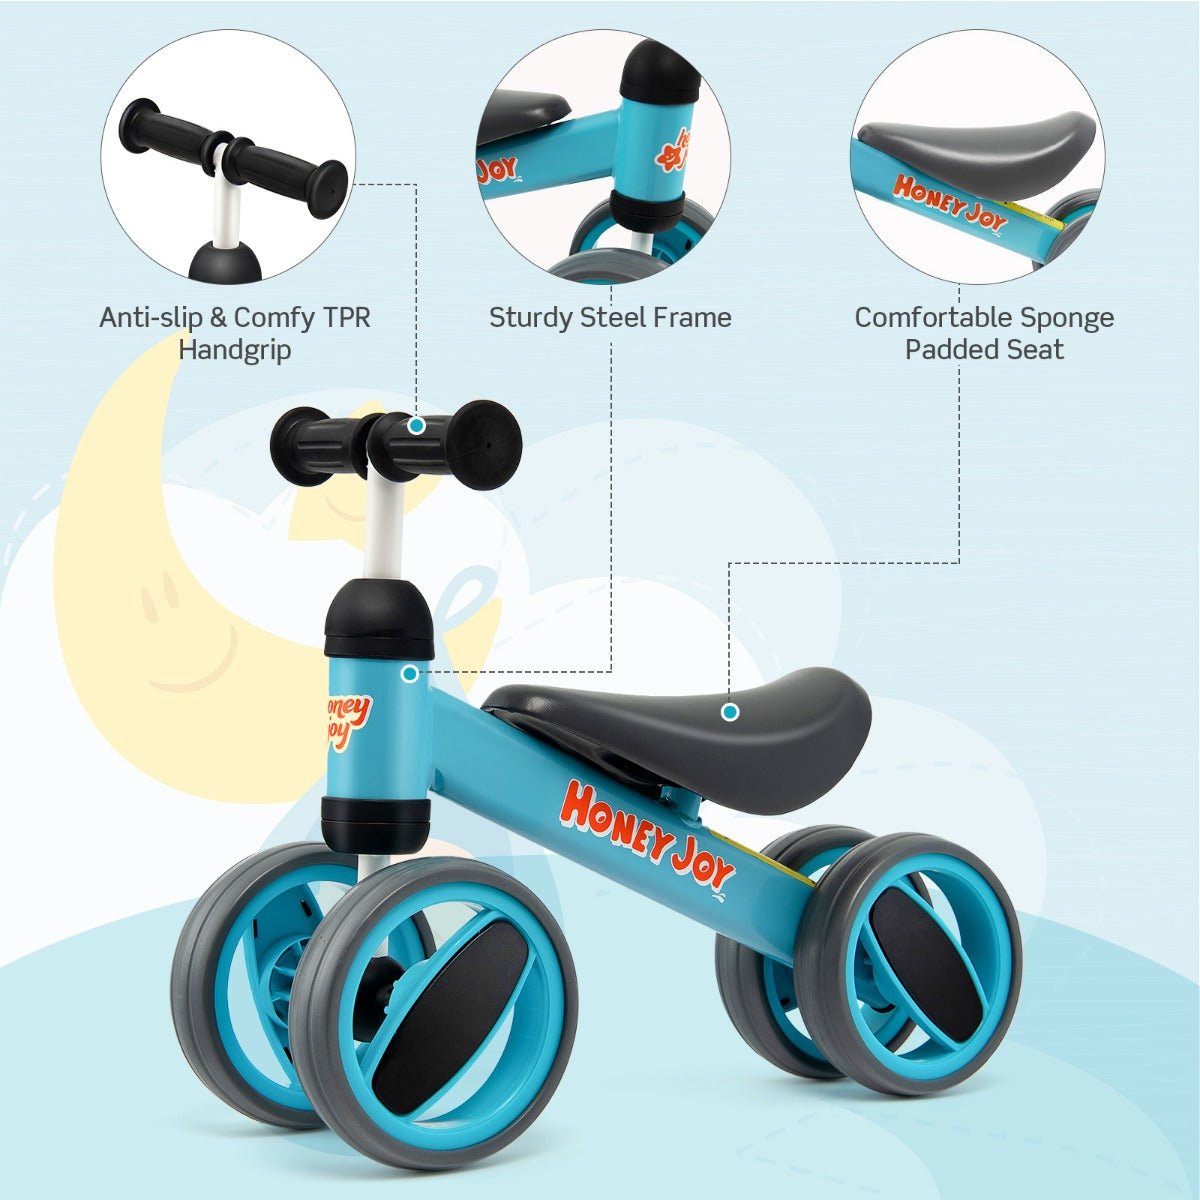 Experience Joy: Blue Baby Balance Bike with Limited Steering